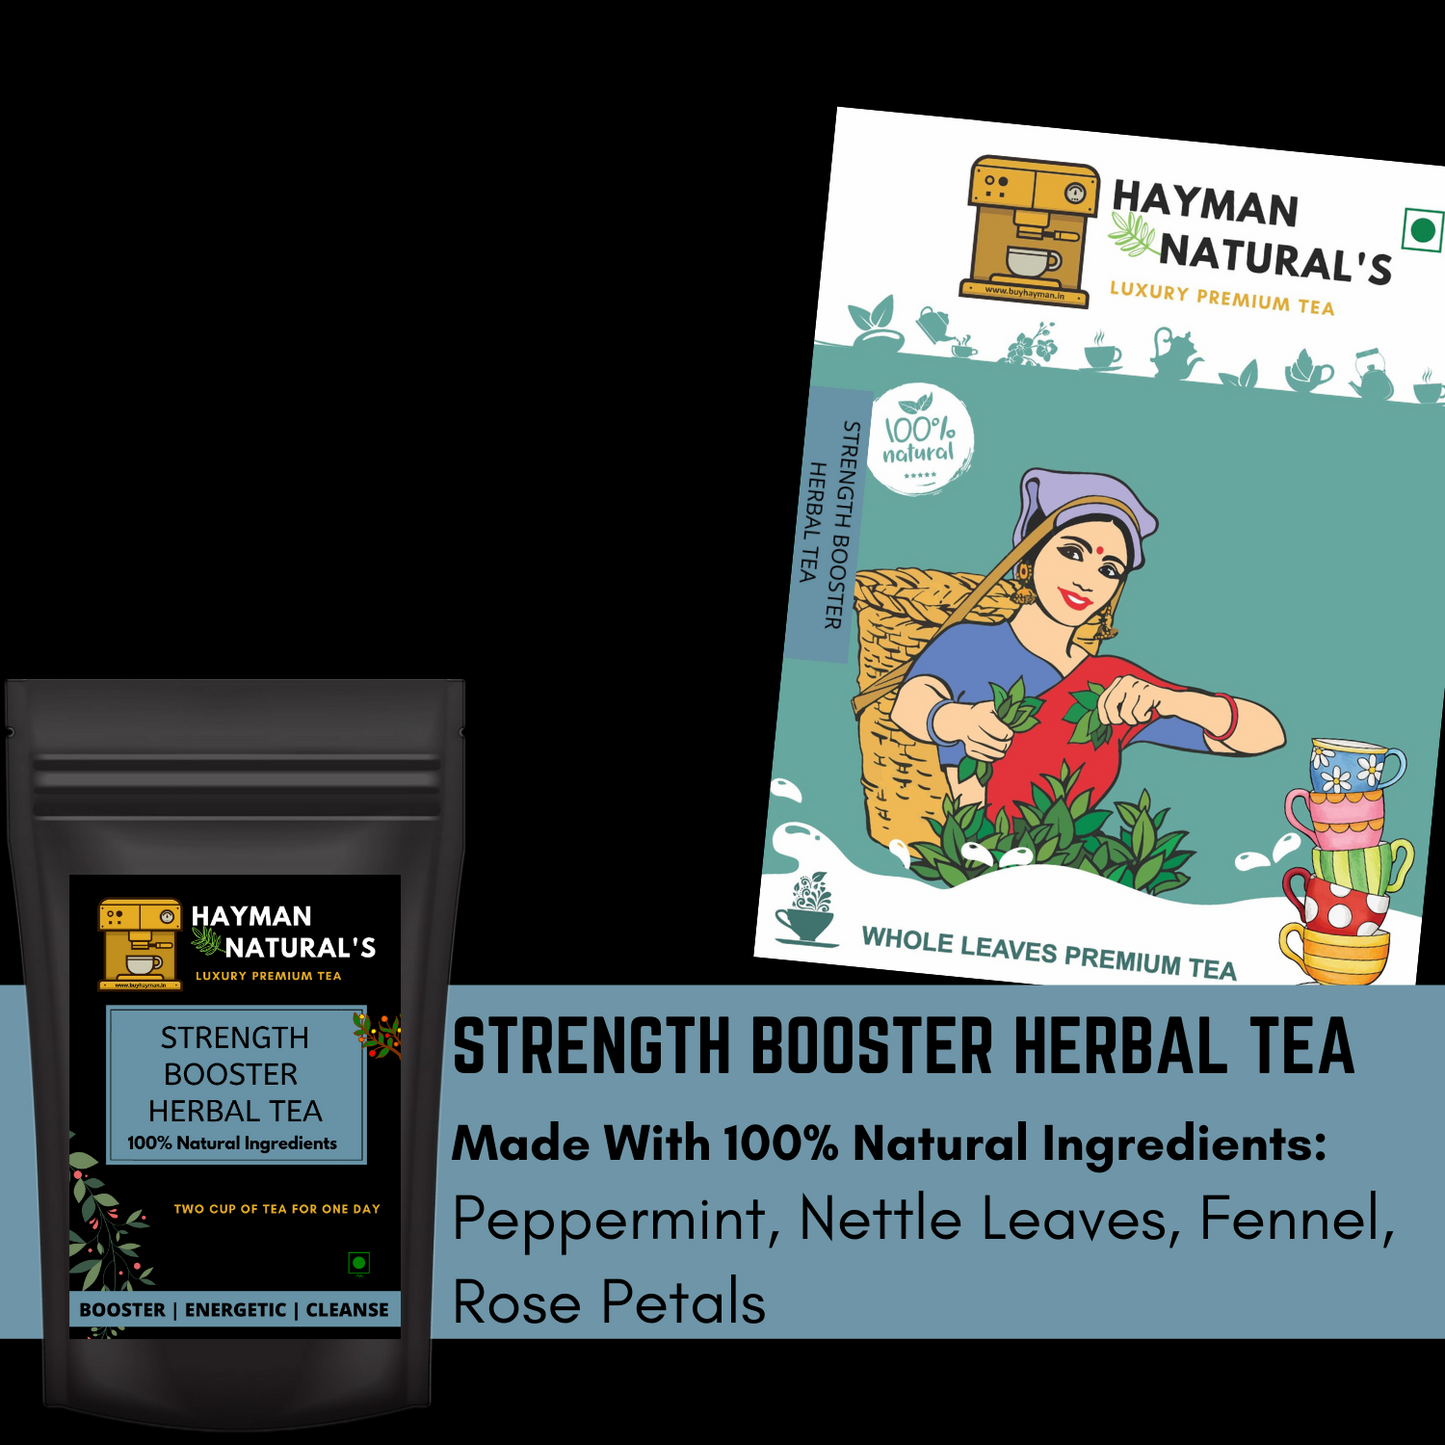 Hayman Natural's Strength Booster Herbal Tea for muscular,circular,digestive and nervous system